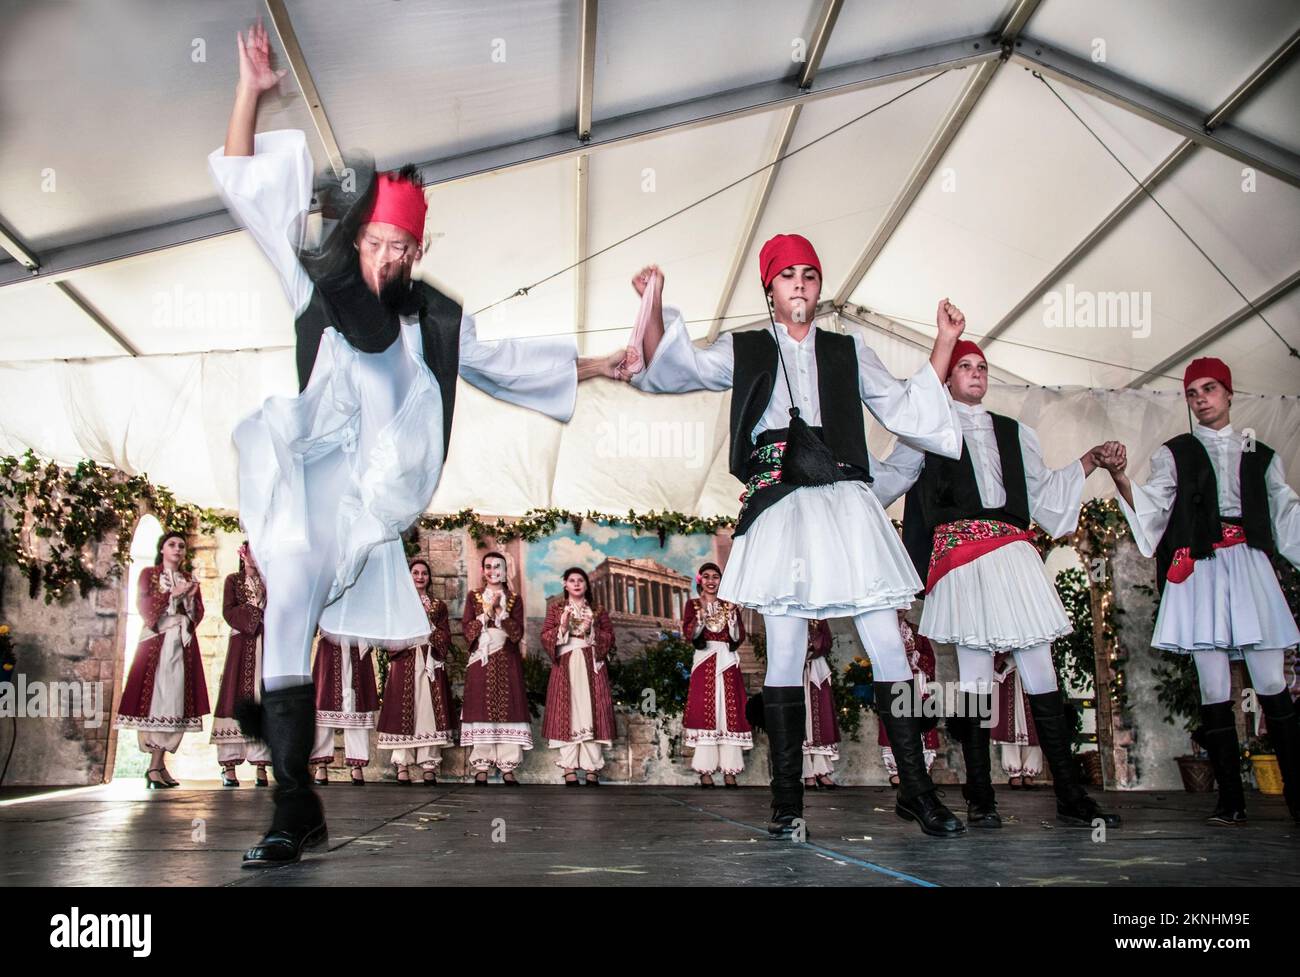 09-21-2019 Tulsa USA - Costumed male Greek dancers in decorated tent venue  featuring dramatic kick at Greek Festival in Tulsa with women dancers clap Stock Photo